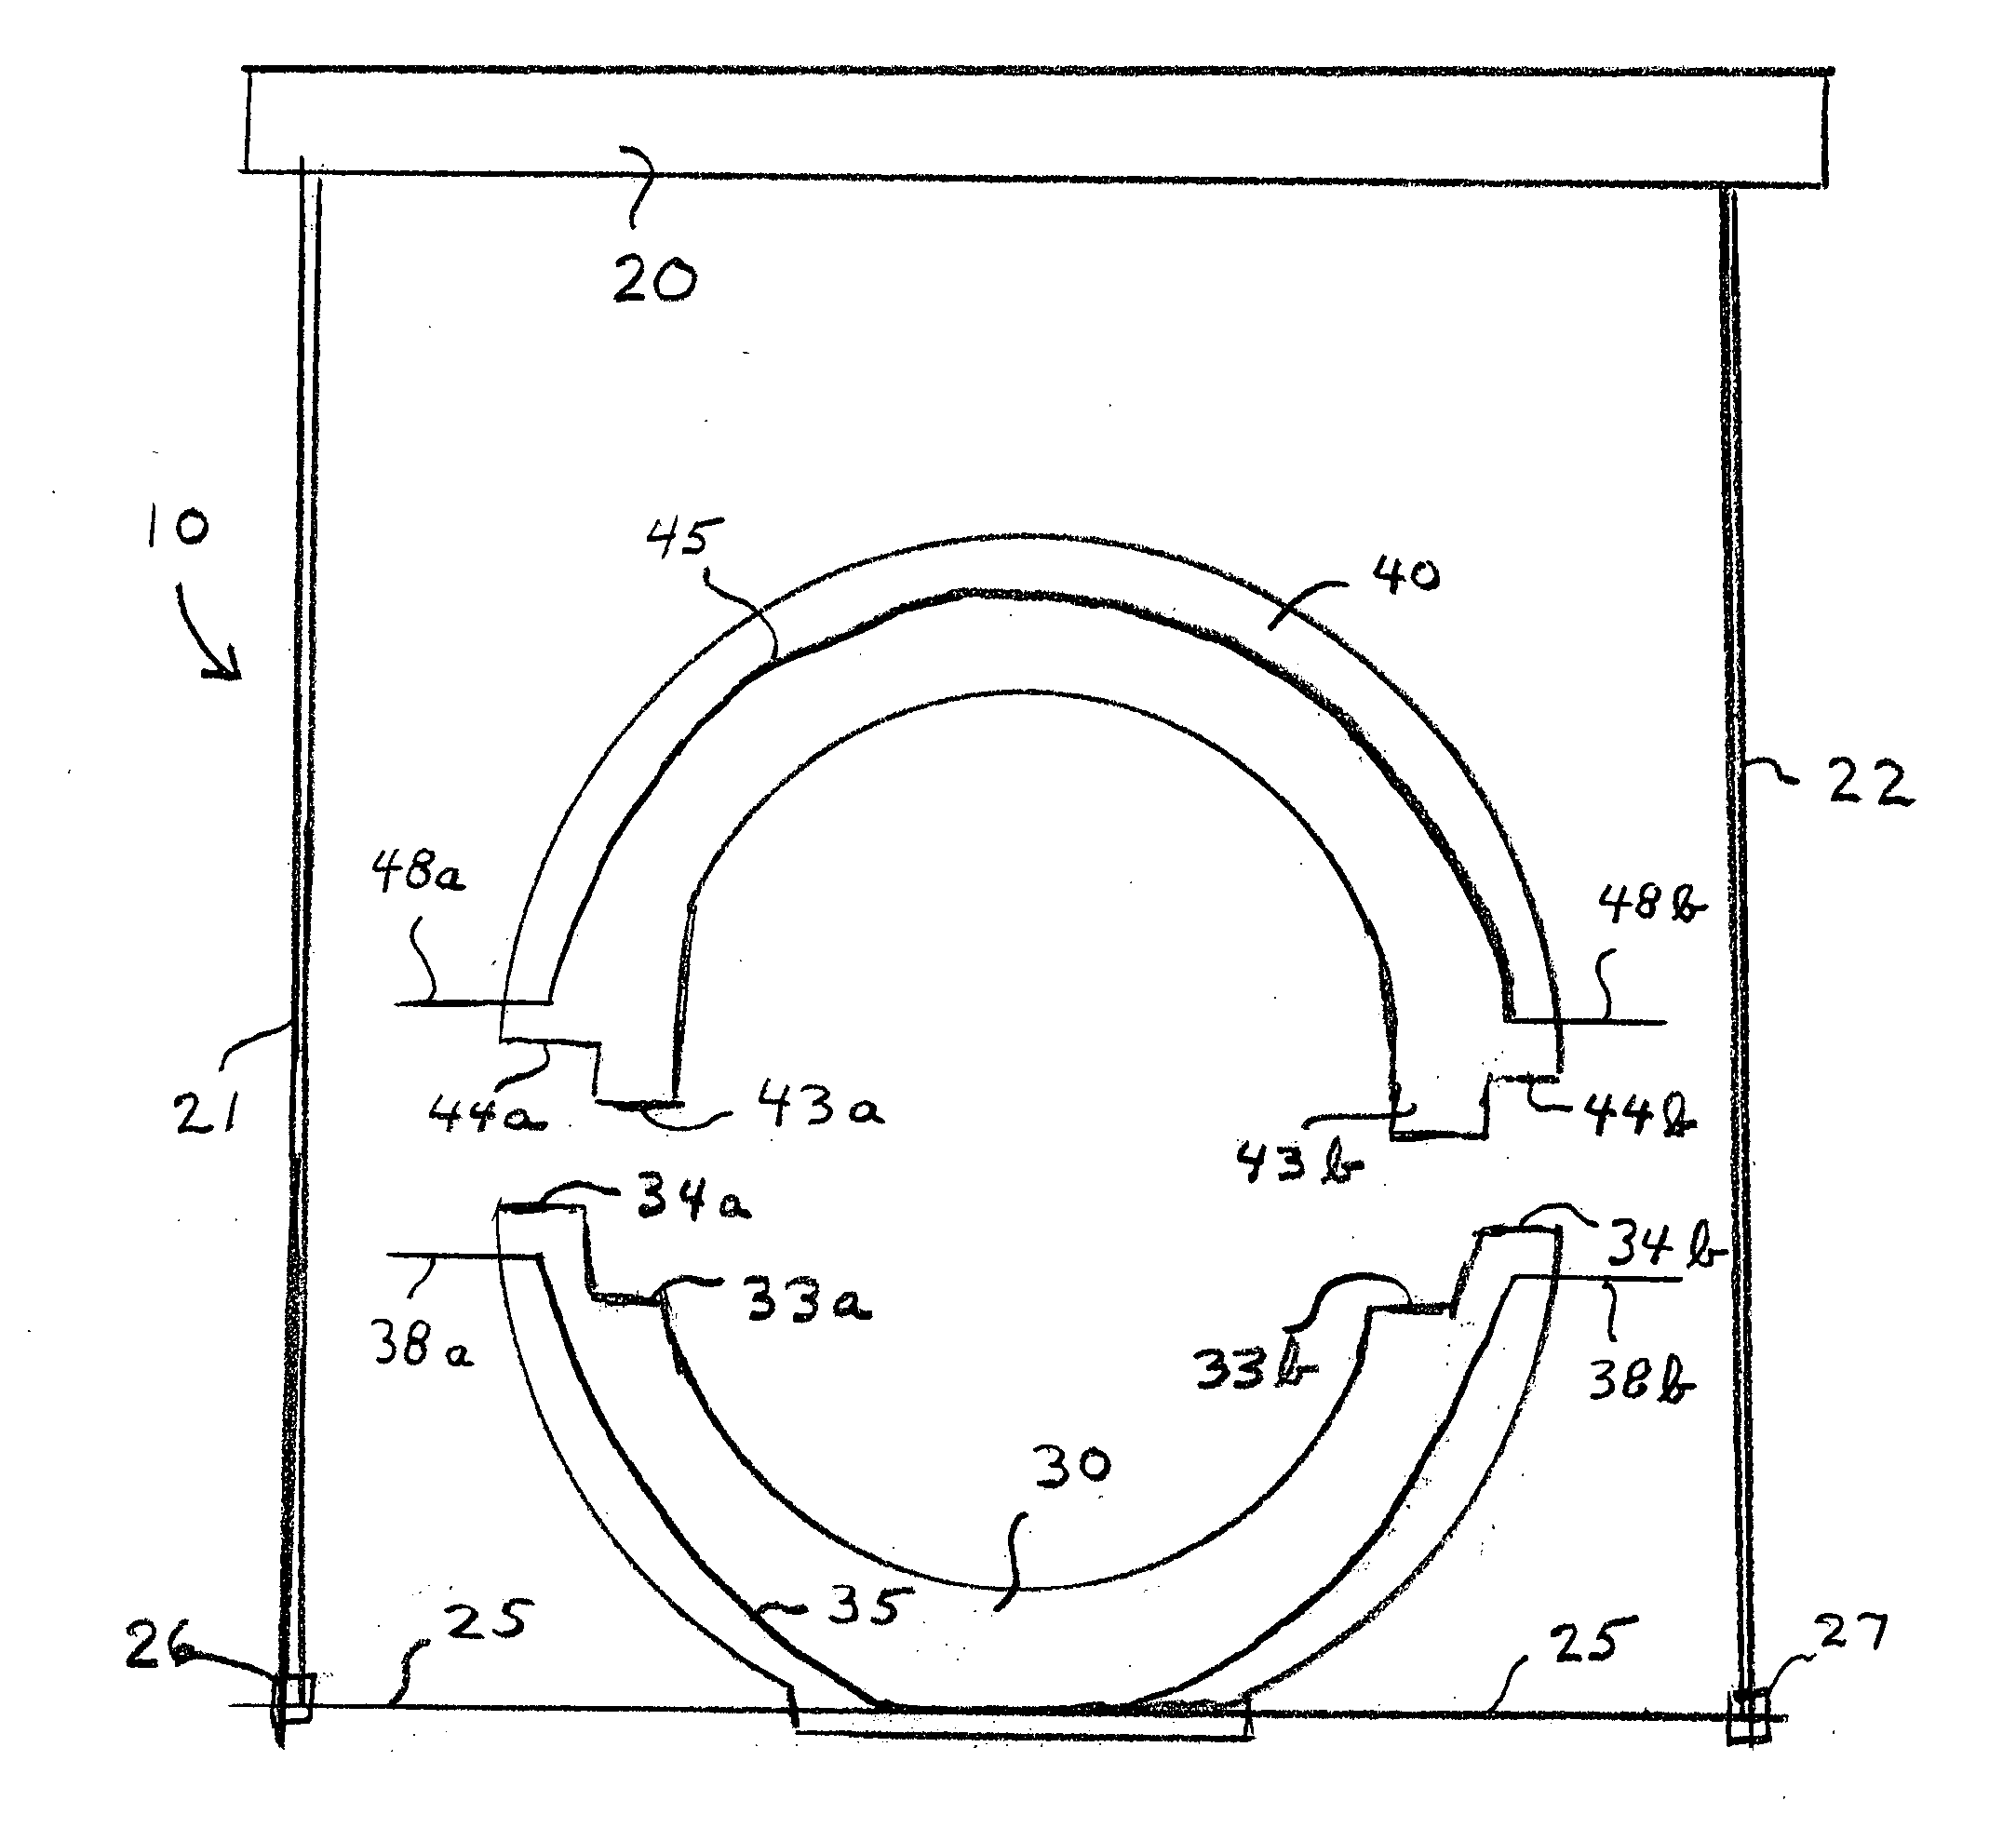 Electrical service conduit system and method of use